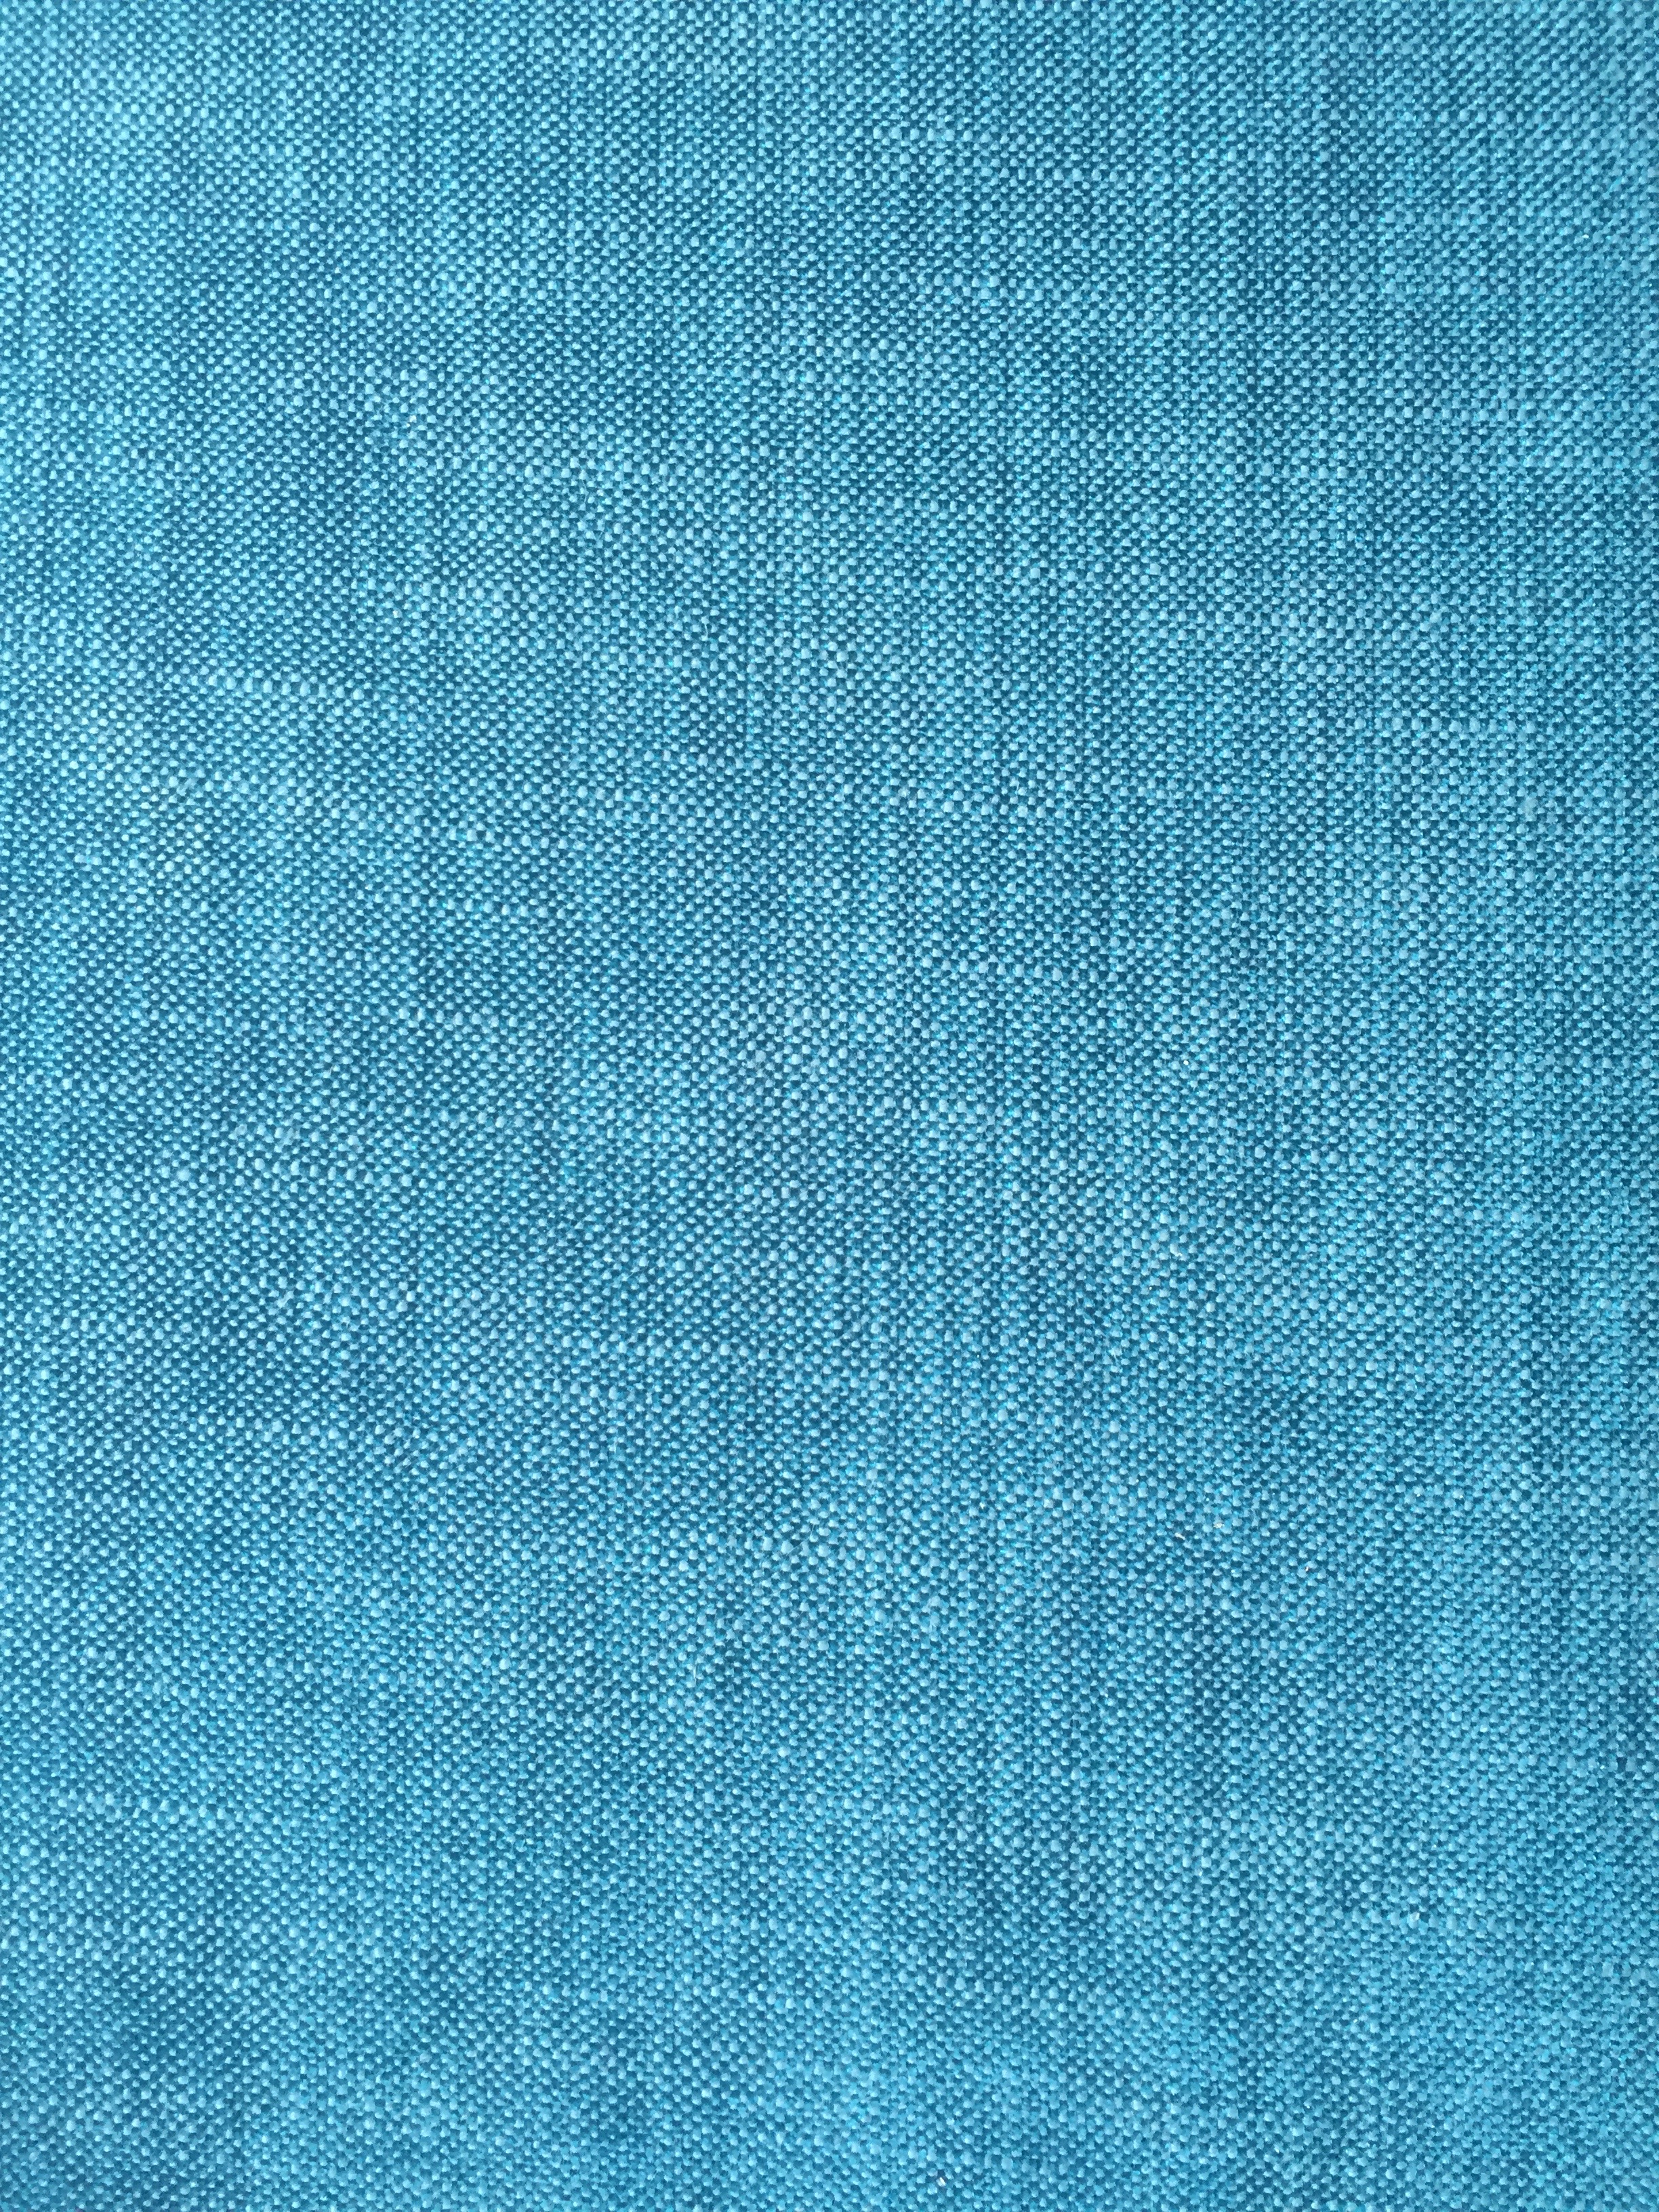 Close up of bright blue fabric texture